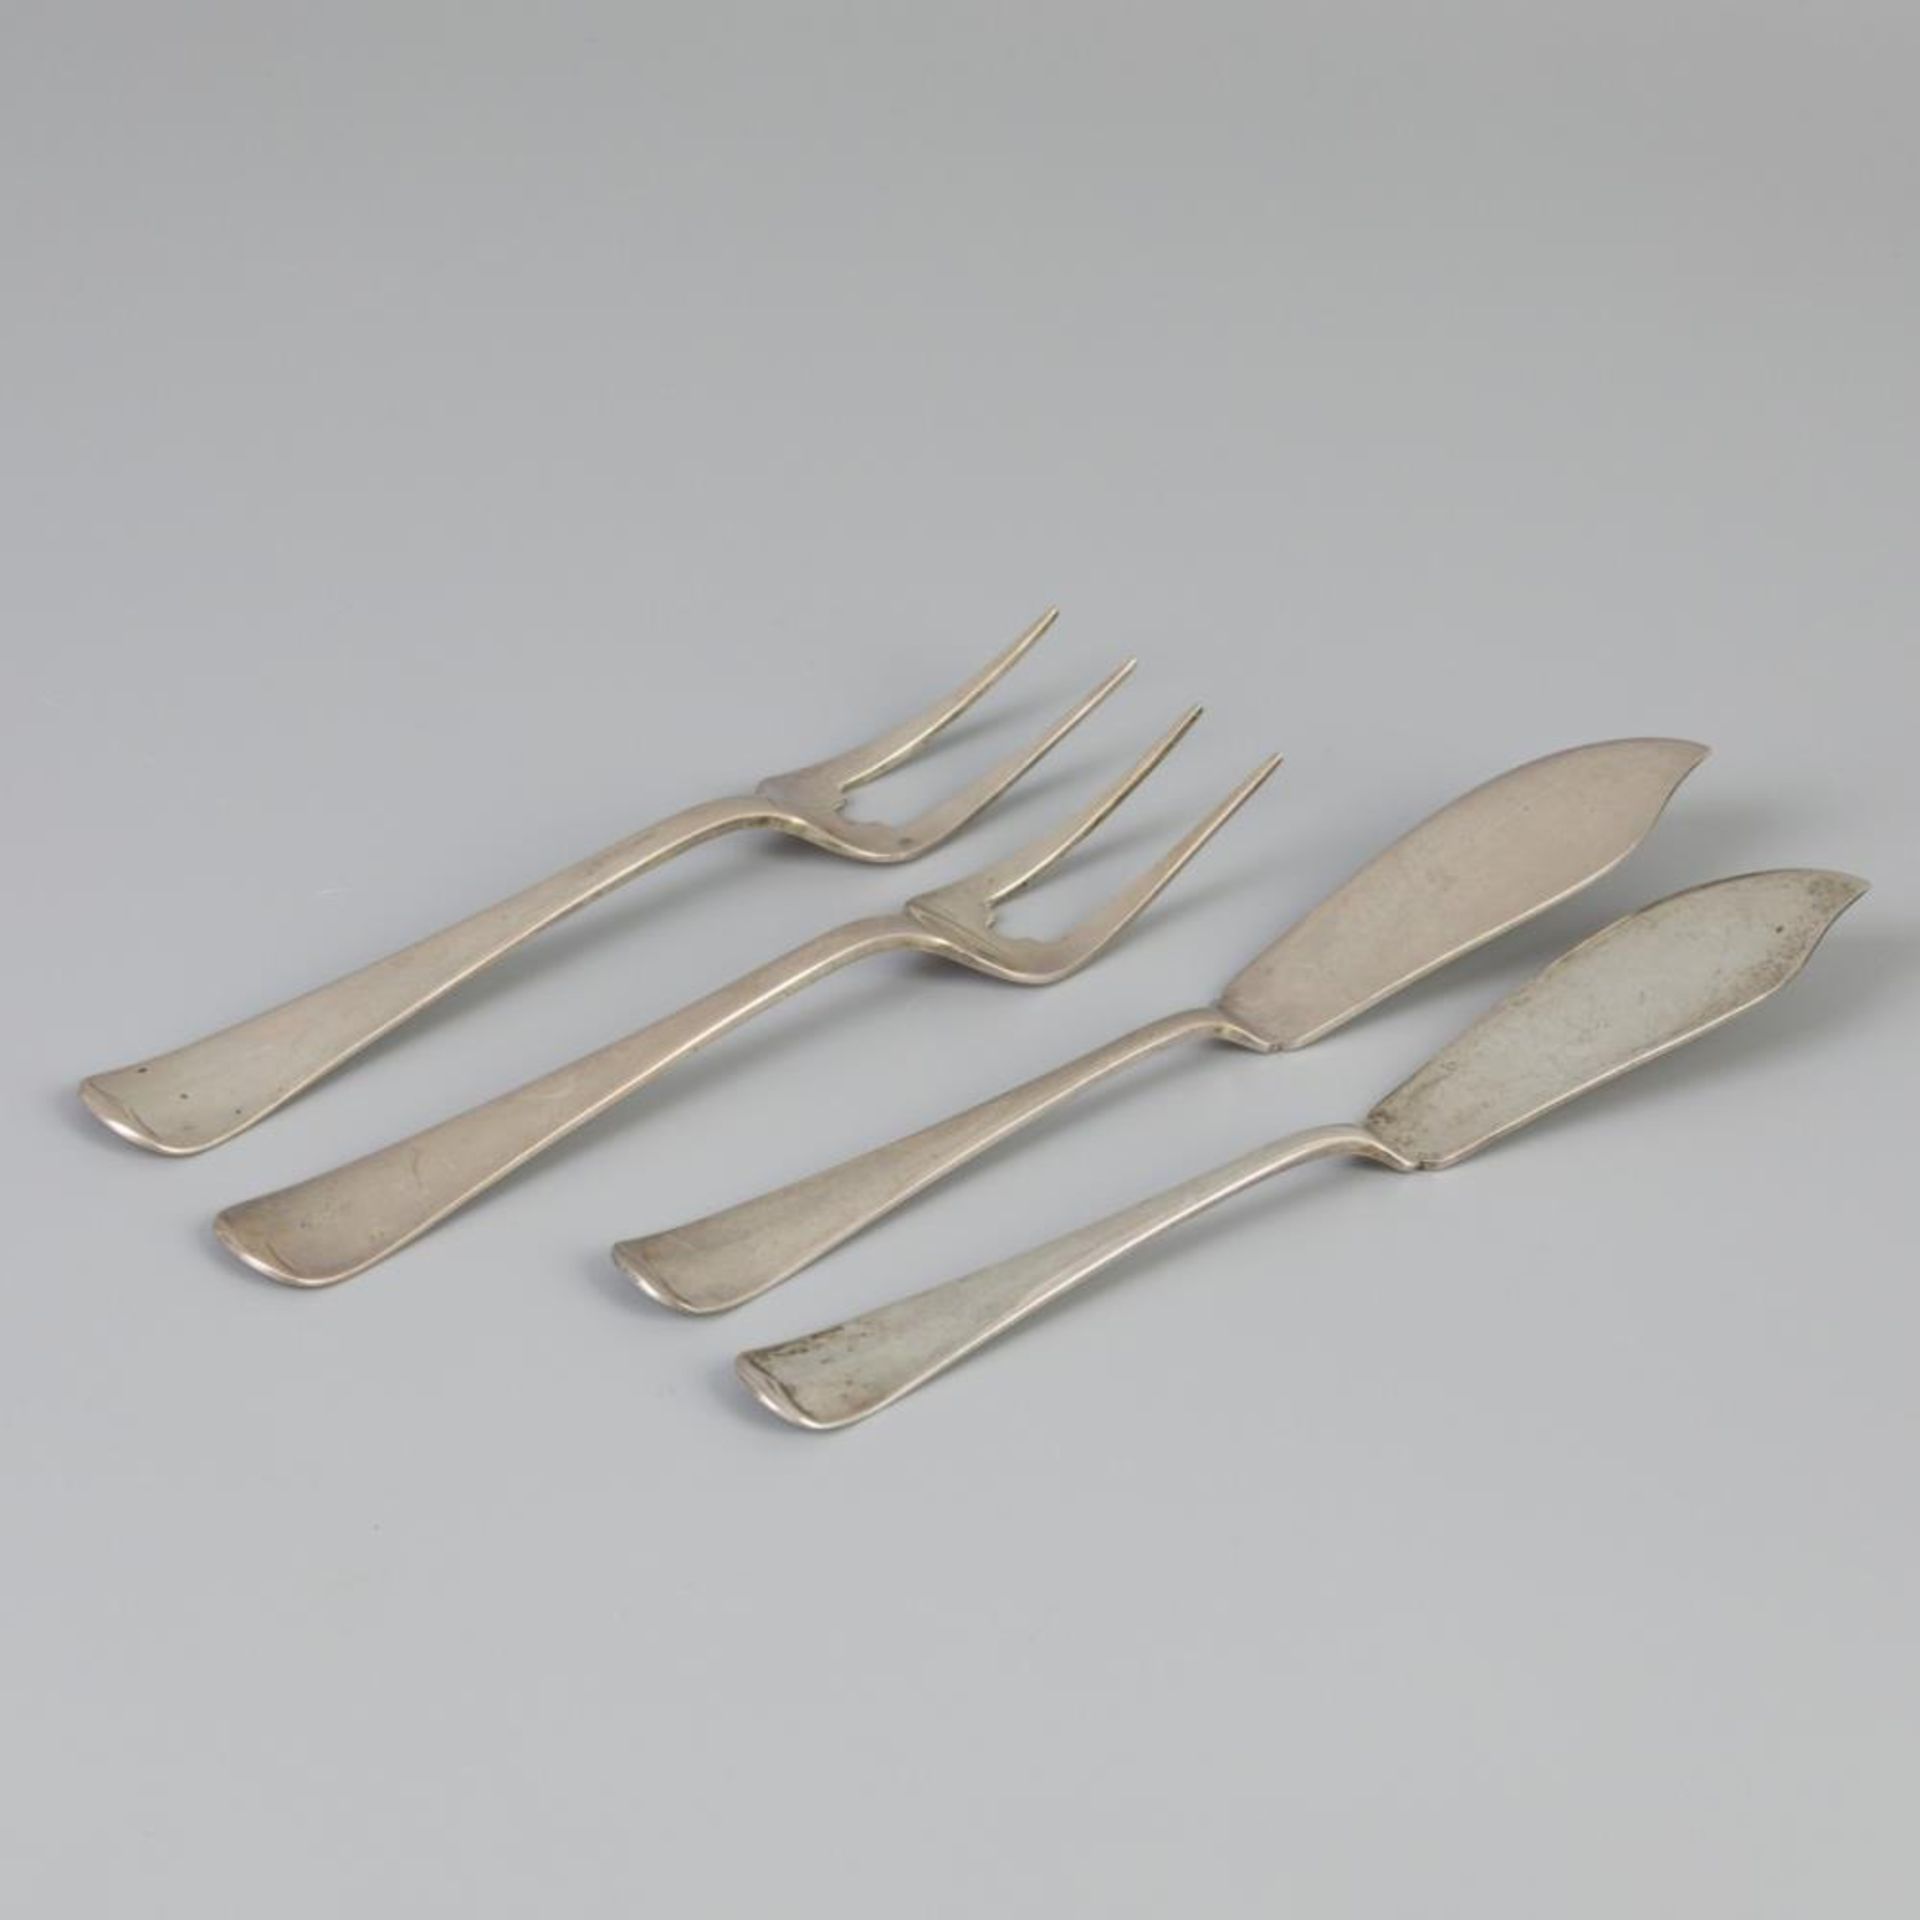 4 piece cutlery parts "Haags Lofje" silver.